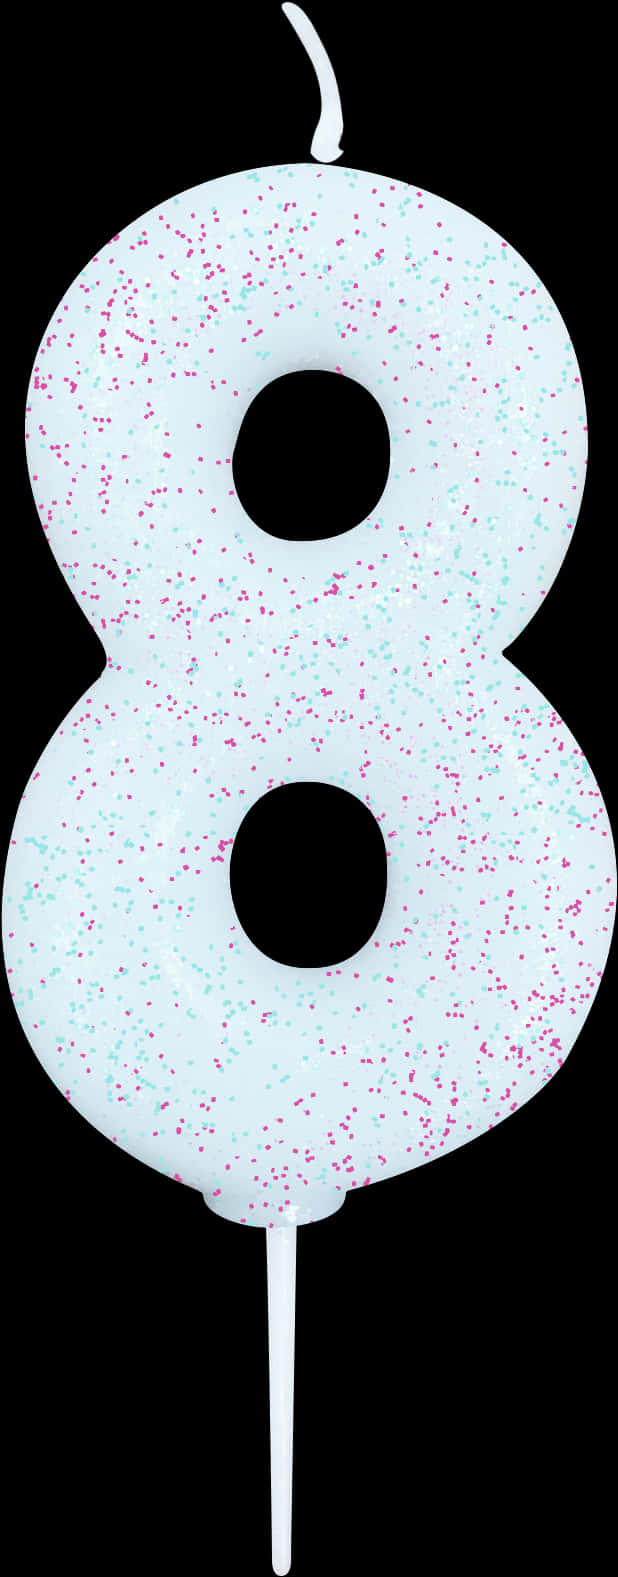 A Number With Pink And Blue Speckled